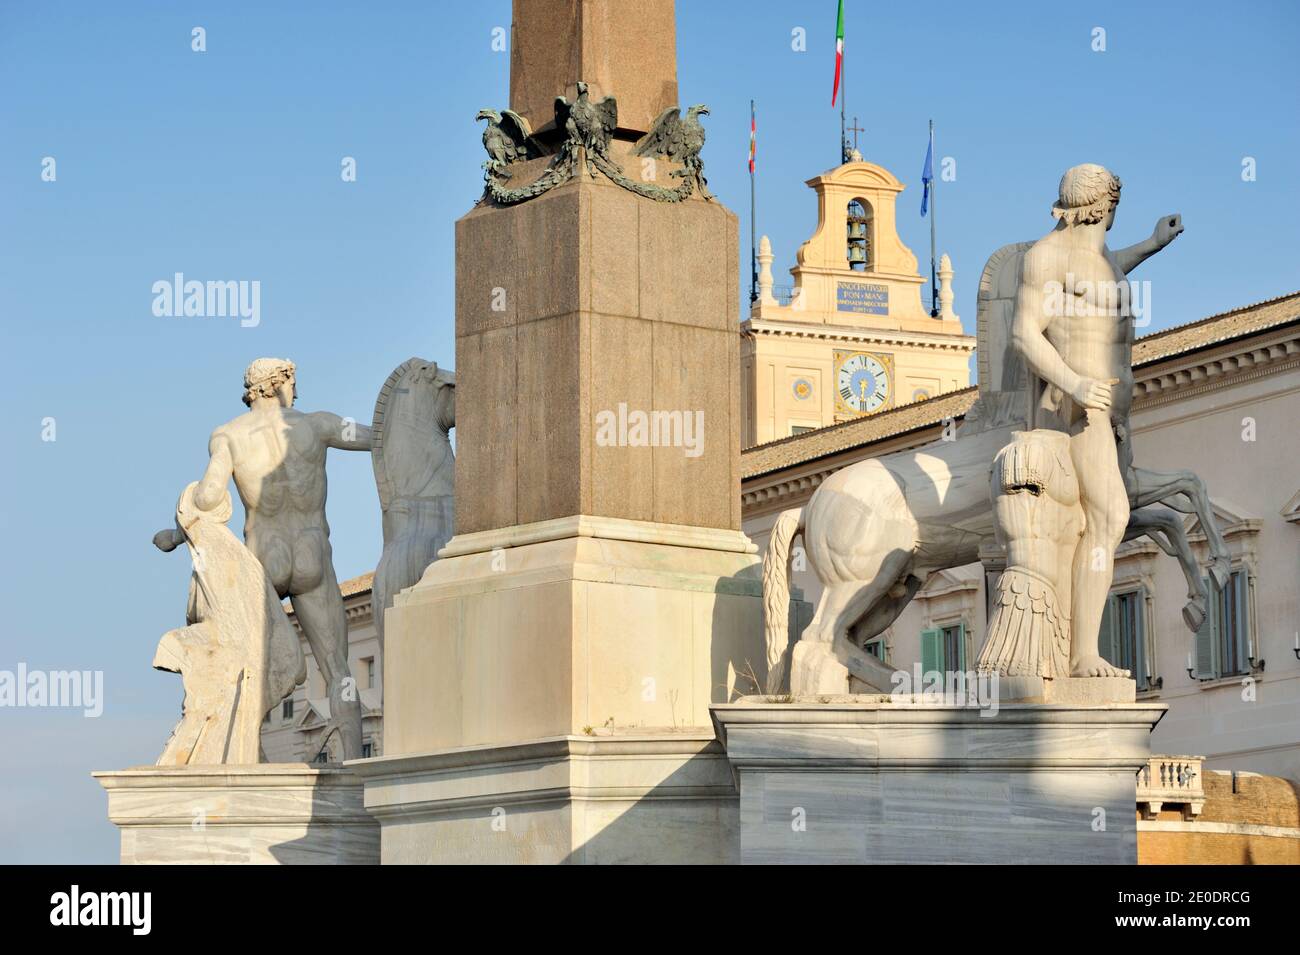 italy, rome, fountain of monte cavallo with the statues of castor and pollux and quirinal palace Stock Photo